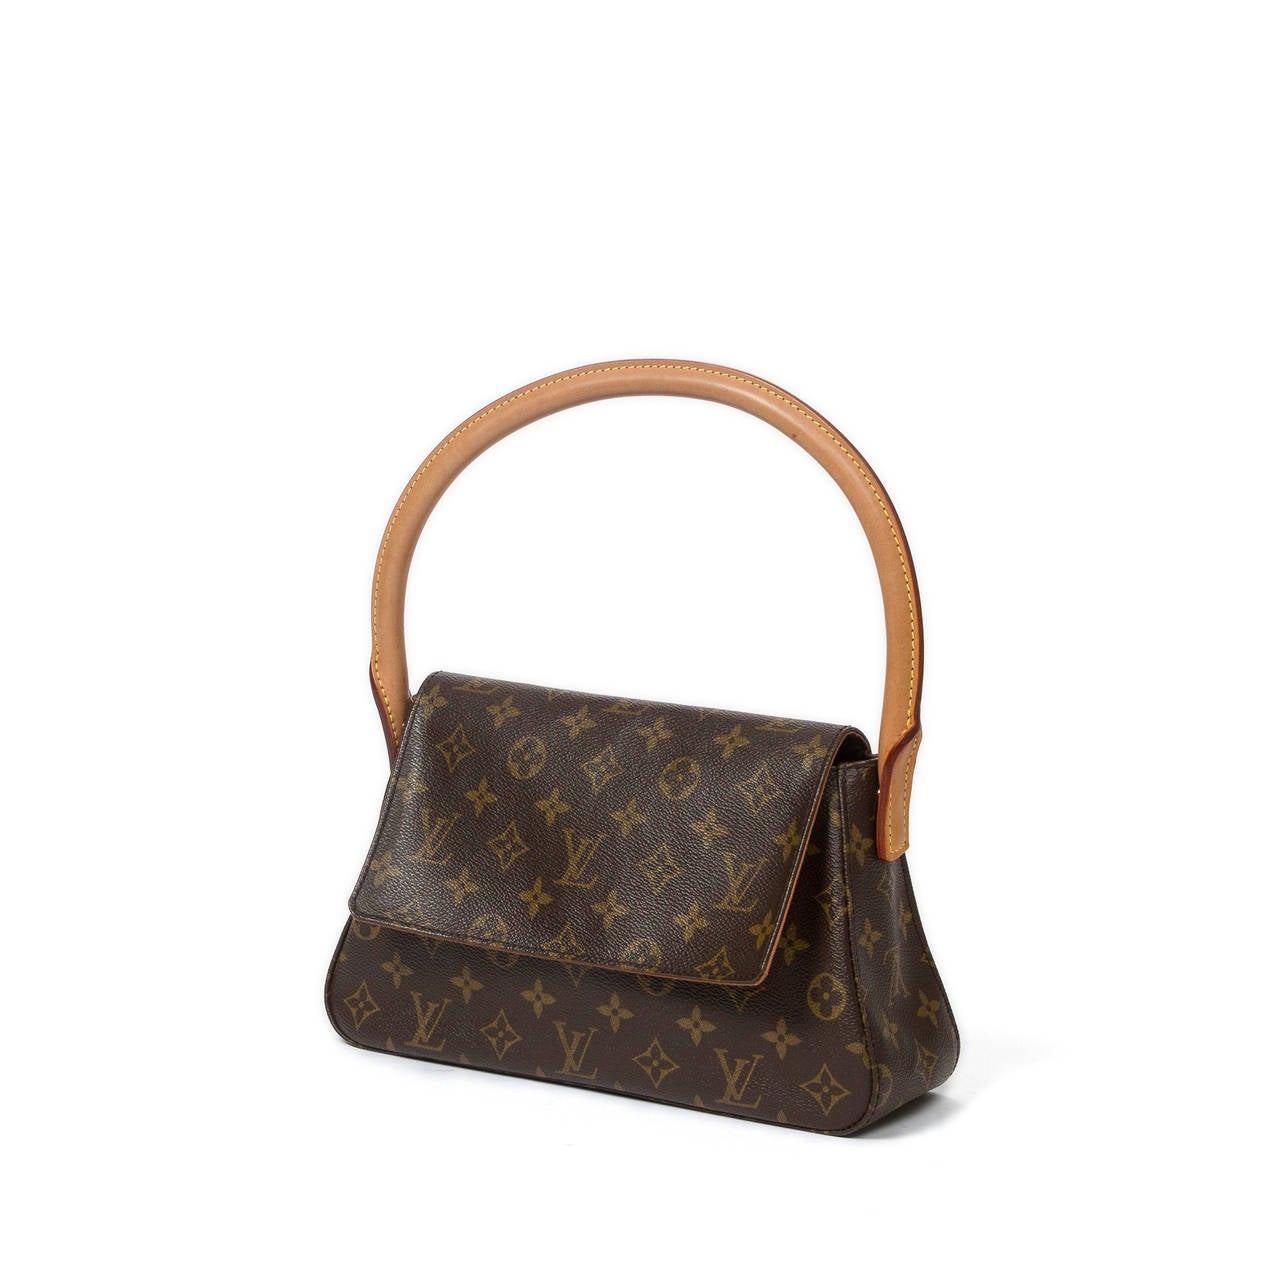 Louis Vuitton Mini Looping in monogram canvas with vachetta leather handle, magnetic closure. Brown canvas lined interior with zip pocket. Model of 2001. Production code : MI1011. Dustbag included. Very nice patina on the leather. Perfect condition.